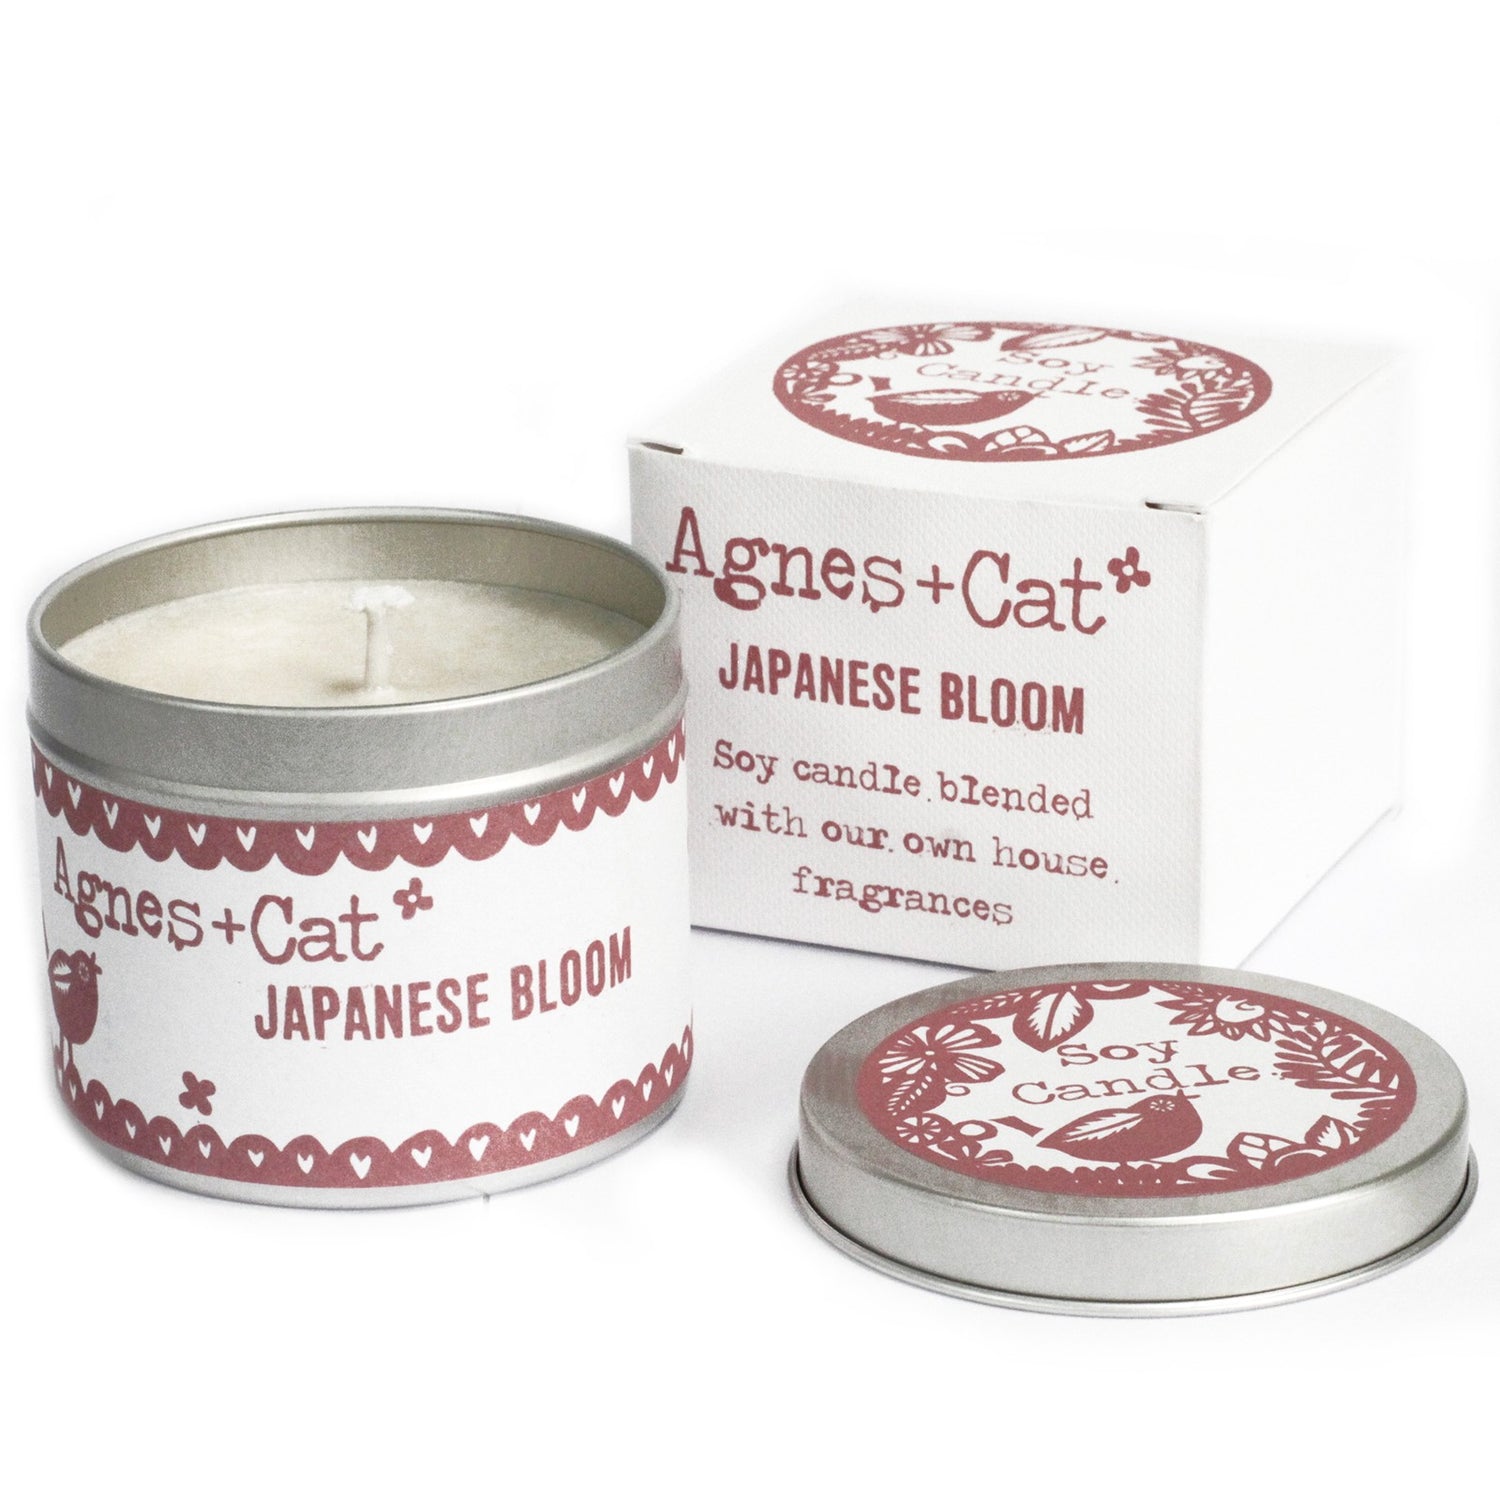 Agnes + Cat Japanese Bloom Fragranced Soy Wax Tin Candle